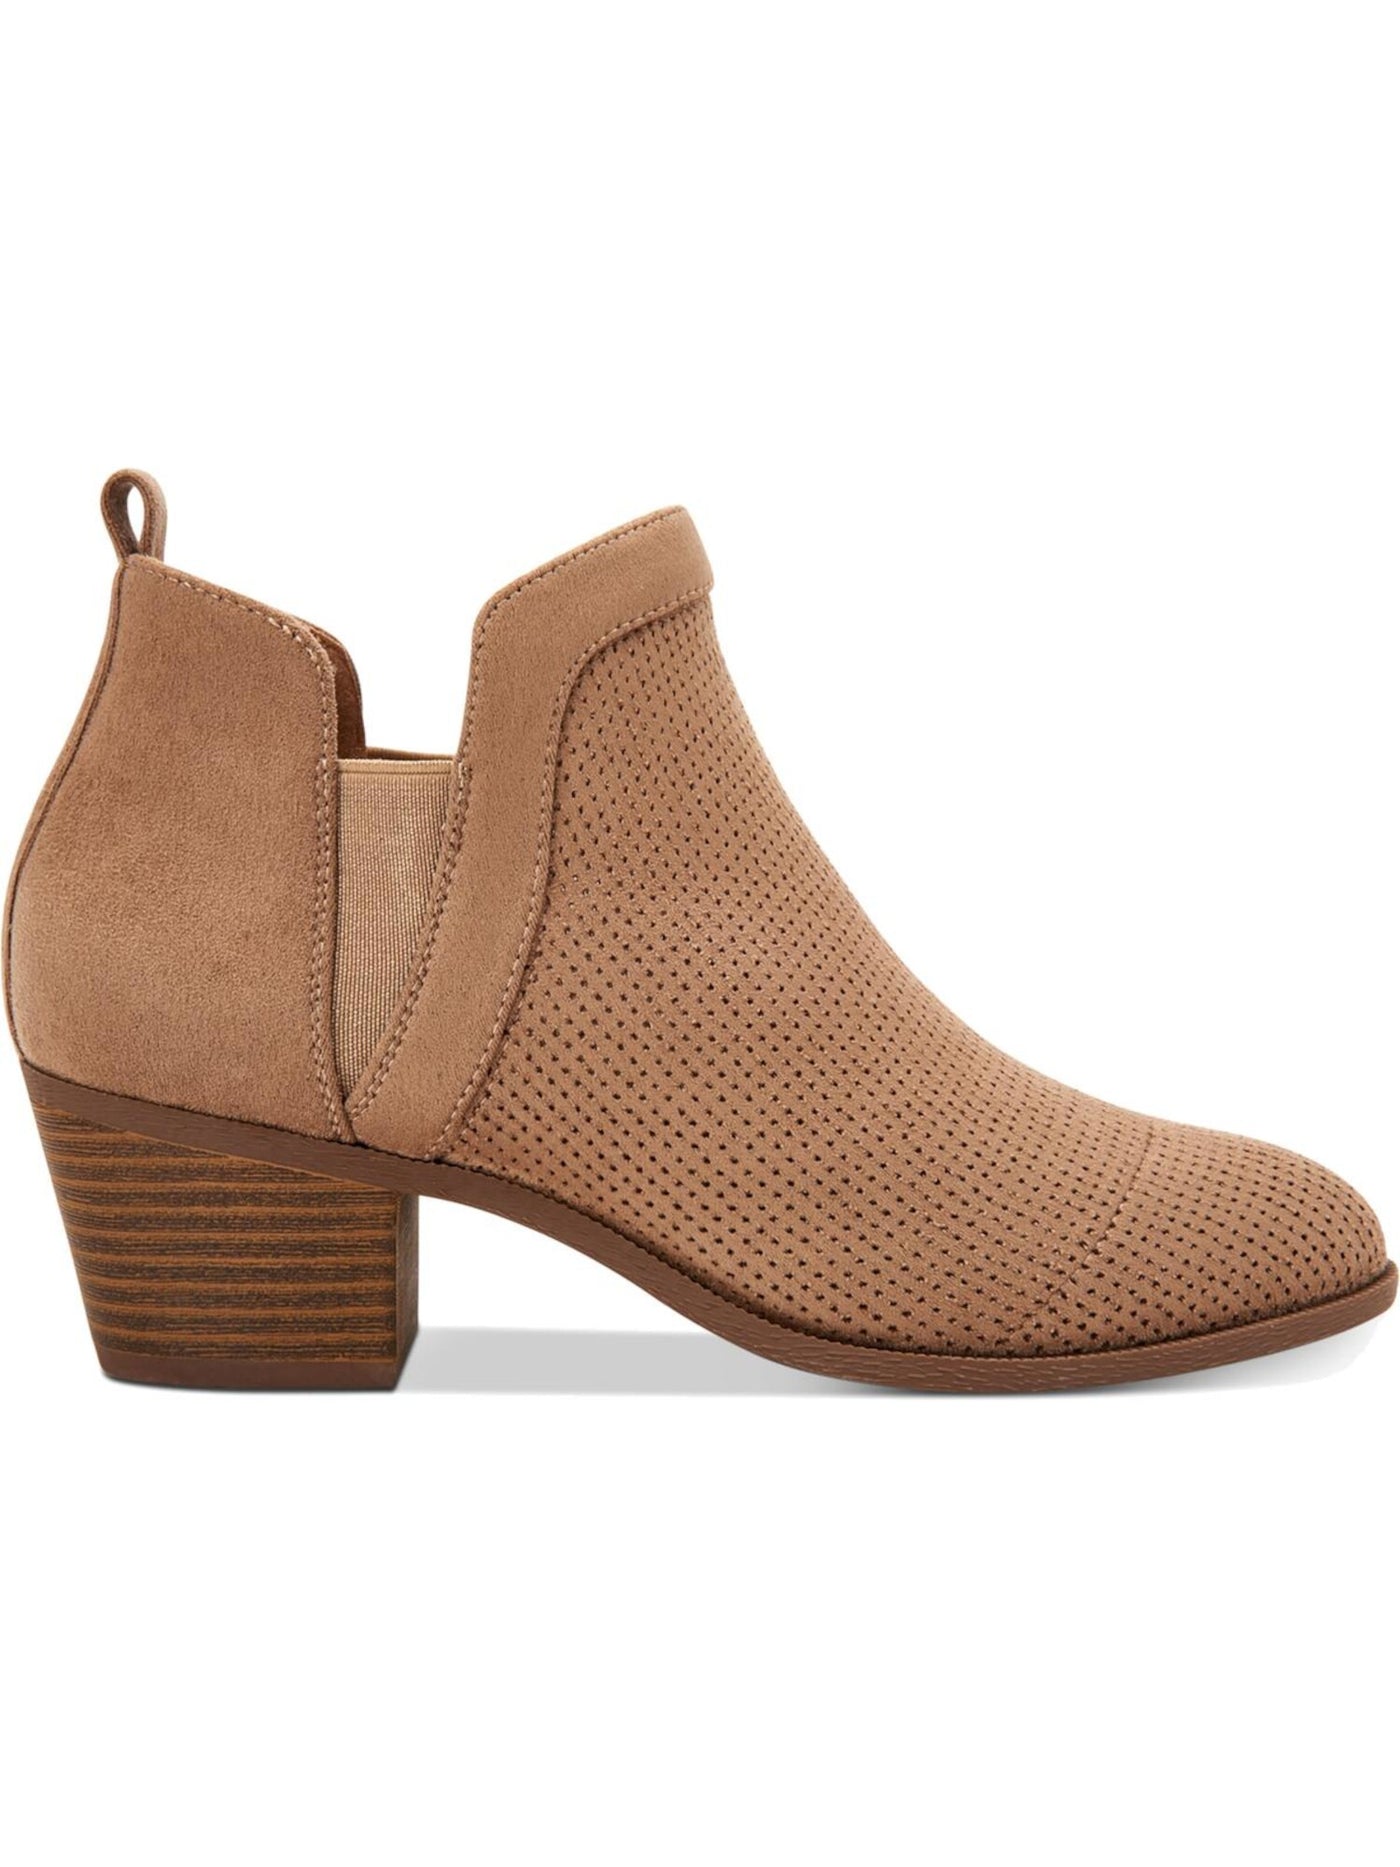 STYLE & COMPANY Womens Beige Stretch Gore Perforated Padded Myrrah Almond Toe Block Heel Booties M